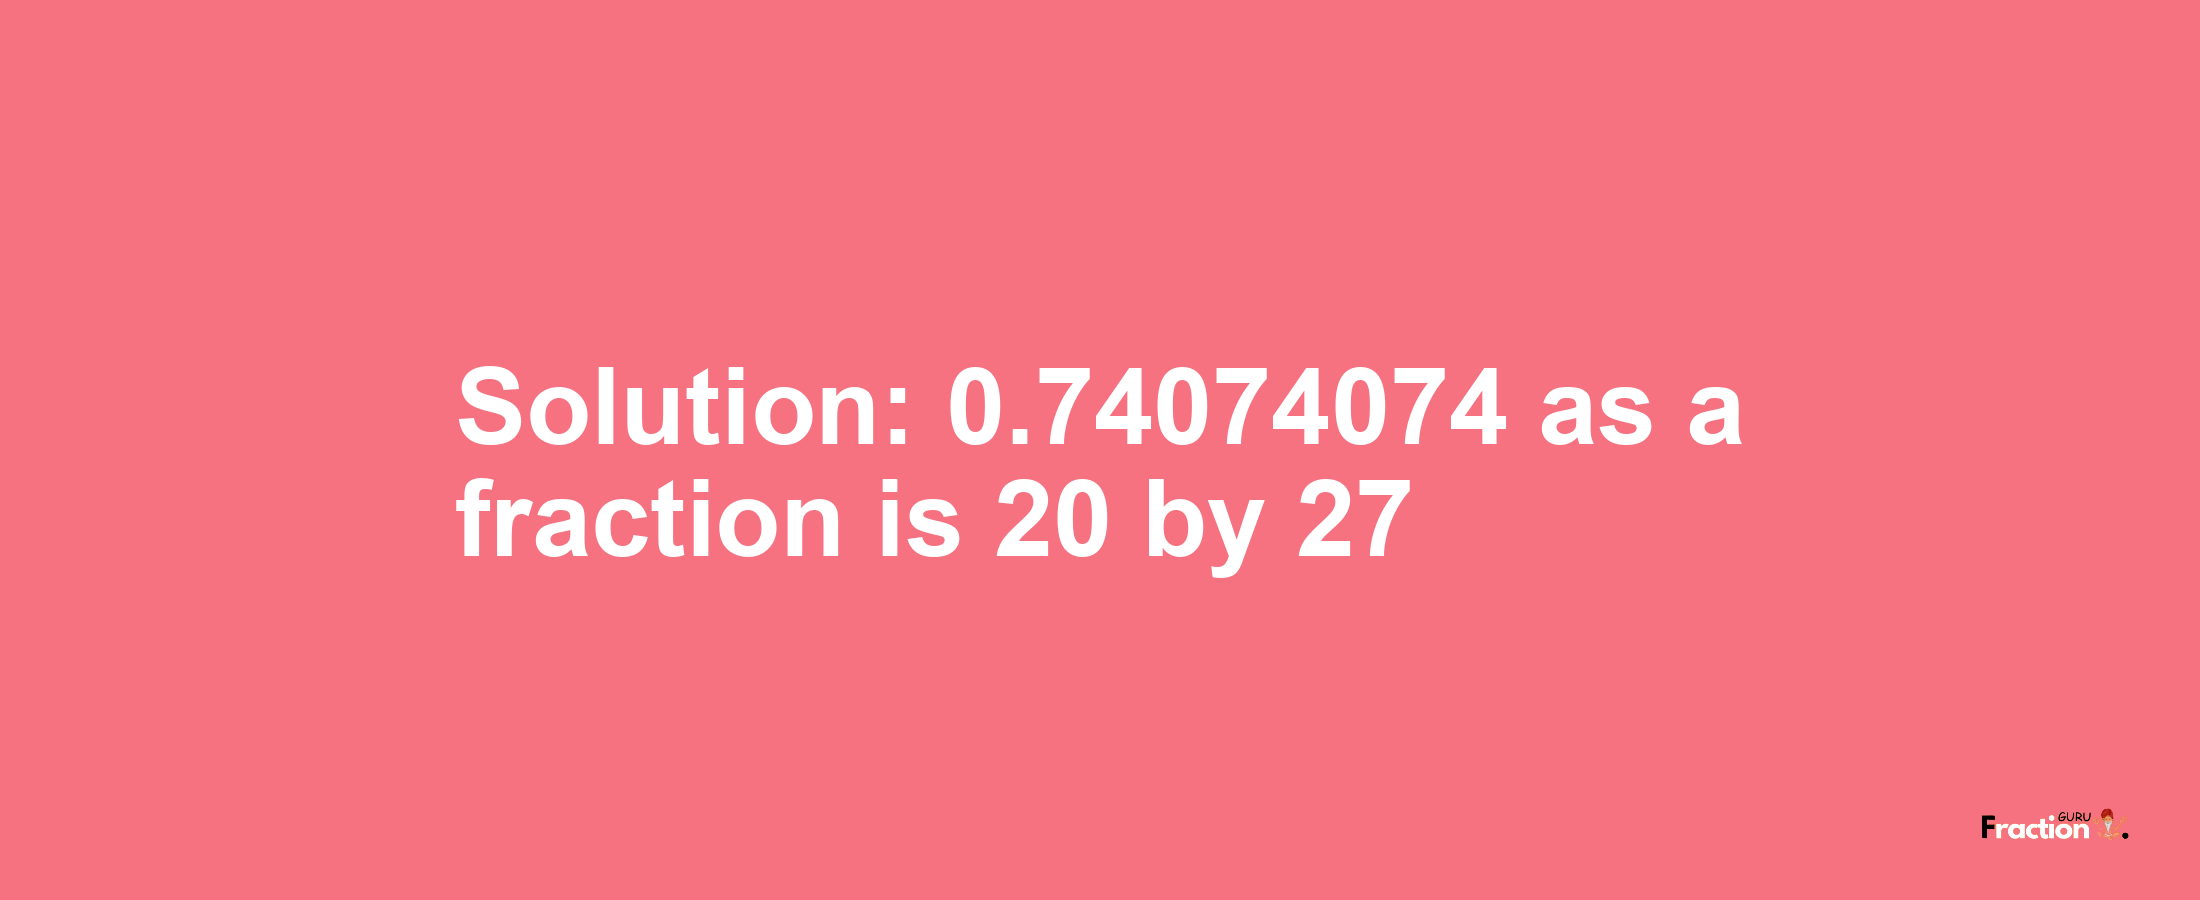 Solution:0.74074074 as a fraction is 20/27